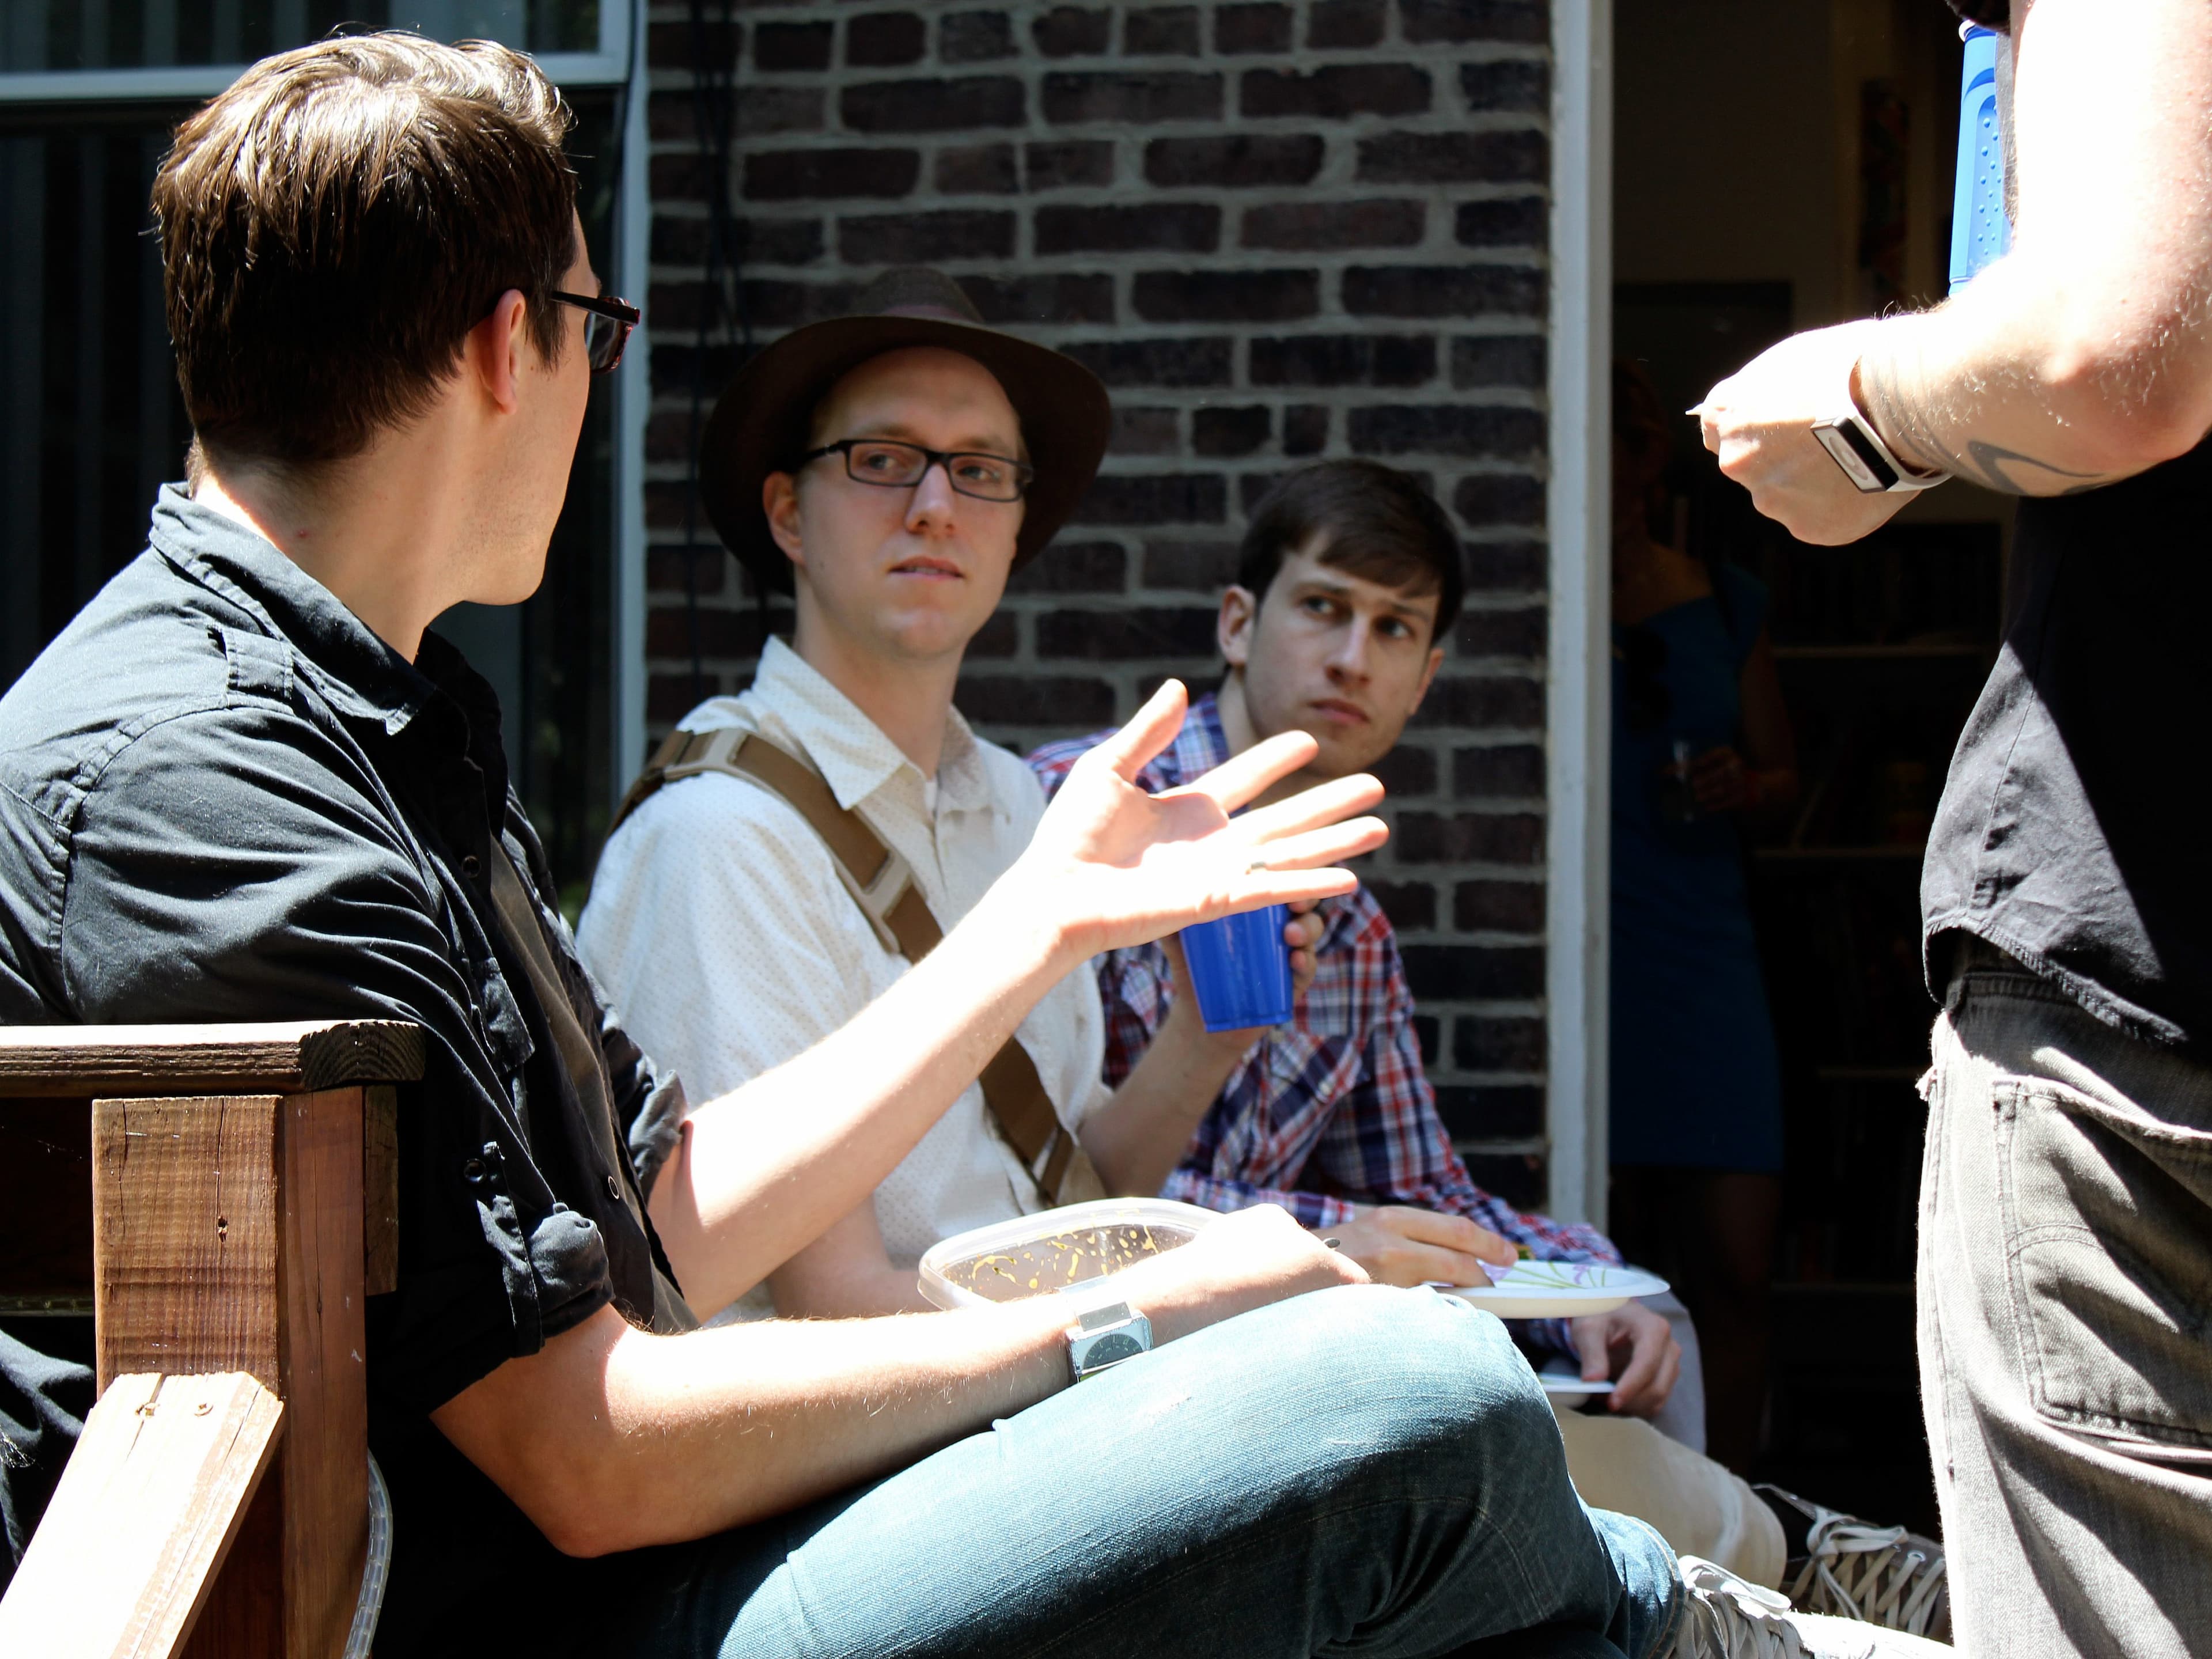 Three people are seated outdoors, engaged in a conversation, with one gesturing animatedly and holding a cup. Another person, standing and facing away from the camera, appears to be joining the discussion. They are in a space with a brick wall and a sunny ambiance.